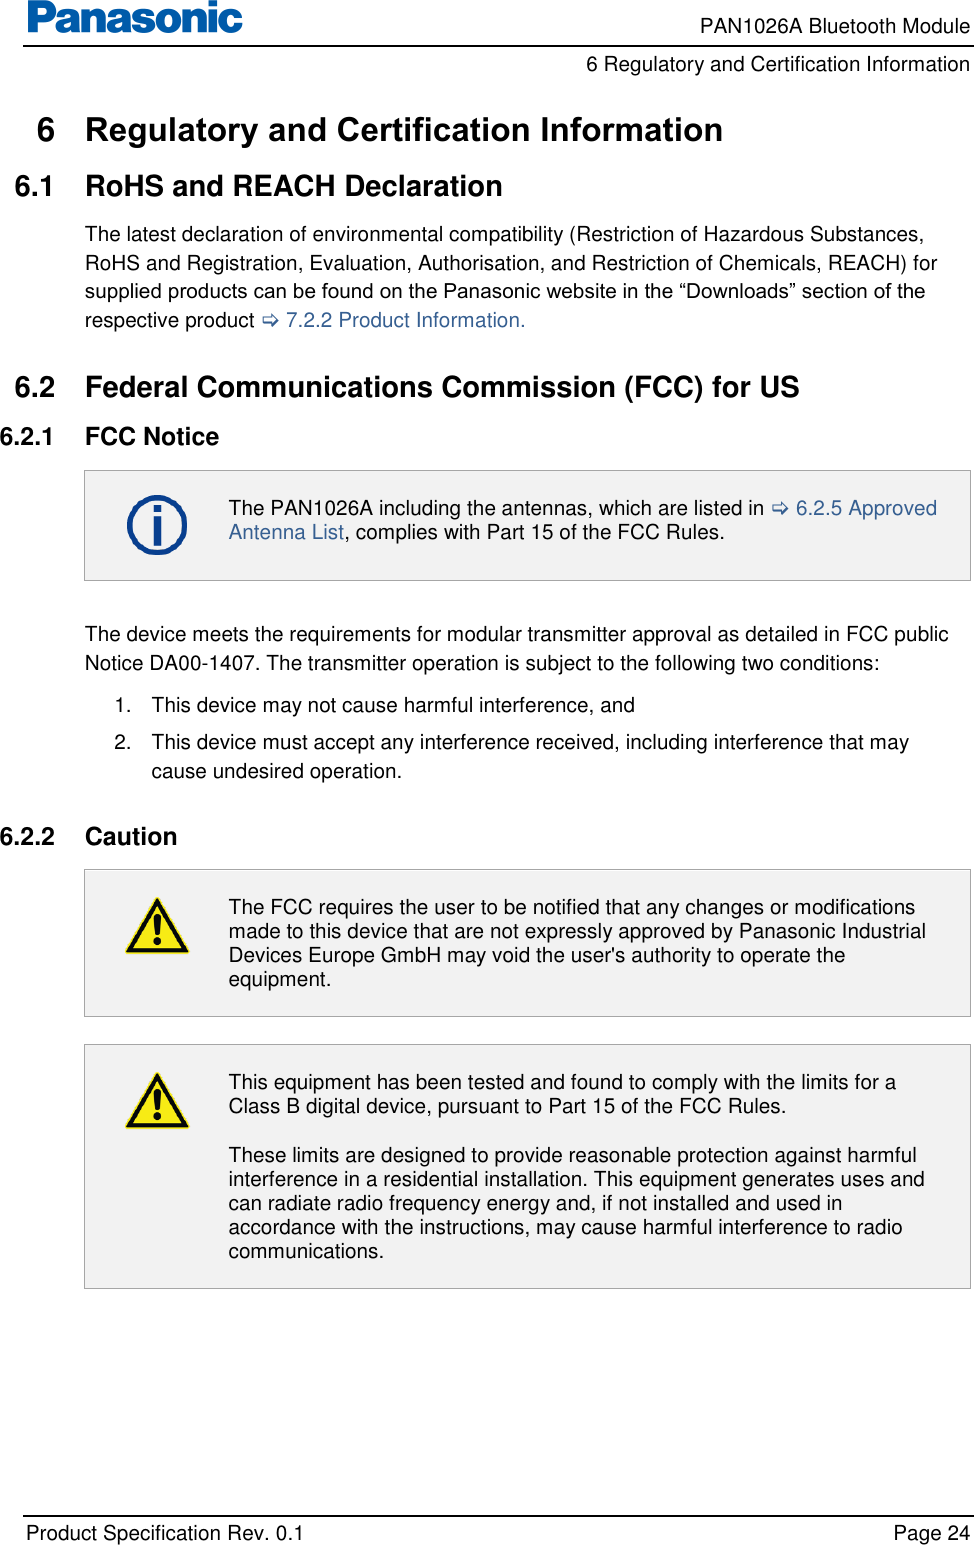     PAN1026A Bluetooth Module         6 Regulatory and Certification Information    Product Specification Rev. 0.1    Page 24  6  Regulatory and Certification Information 6.1  RoHS and REACH Declaration The latest declaration of environmental compatibility (Restriction of Hazardous Substances, RoHS and Registration, Evaluation, Authorisation, and Restriction of Chemicals, REACH) for supplied products can be found on the Panasonic website in the “Downloads” section of the respective product  7.2.2 Product Information.  6.2  Federal Communications Commission (FCC) for US 6.2.1  FCC Notice  The PAN1026A including the antennas, which are listed in  6.2.5 Approved Antenna List, complies with Part 15 of the FCC Rules.  The device meets the requirements for modular transmitter approval as detailed in FCC public Notice DA00-1407. The transmitter operation is subject to the following two conditions: 1.  This device may not cause harmful interference, and  2.  This device must accept any interference received, including interference that may cause undesired operation.  6.2.2  Caution  The FCC requires the user to be notified that any changes or modifications made to this device that are not expressly approved by Panasonic Industrial Devices Europe GmbH may void the user&apos;s authority to operate the equipment.   This equipment has been tested and found to comply with the limits for a Class B digital device, pursuant to Part 15 of the FCC Rules. These limits are designed to provide reasonable protection against harmful interference in a residential installation. This equipment generates uses and can radiate radio frequency energy and, if not installed and used in accordance with the instructions, may cause harmful interference to radio communications.  